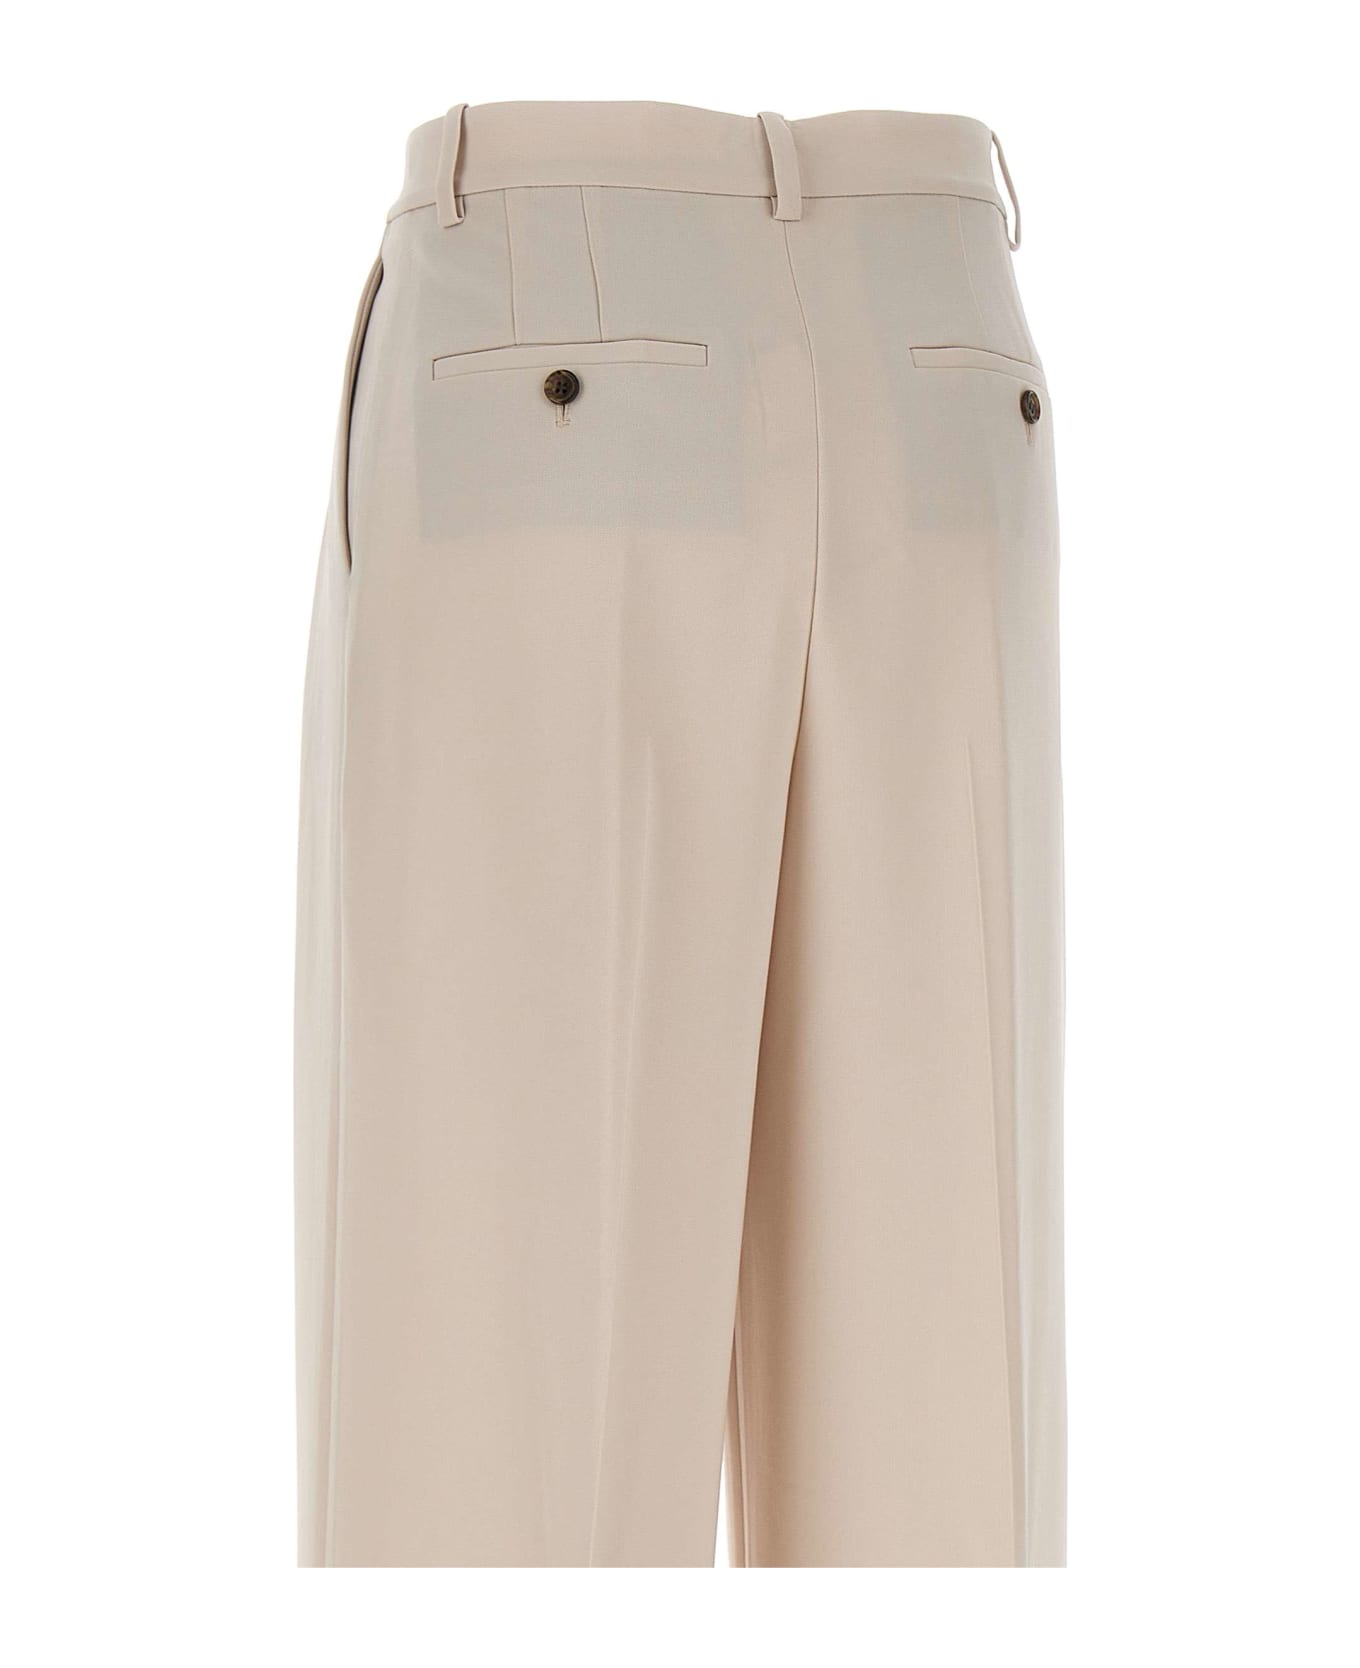 Theory "dbl Pleat" Trousers - BEIGE ボトムス